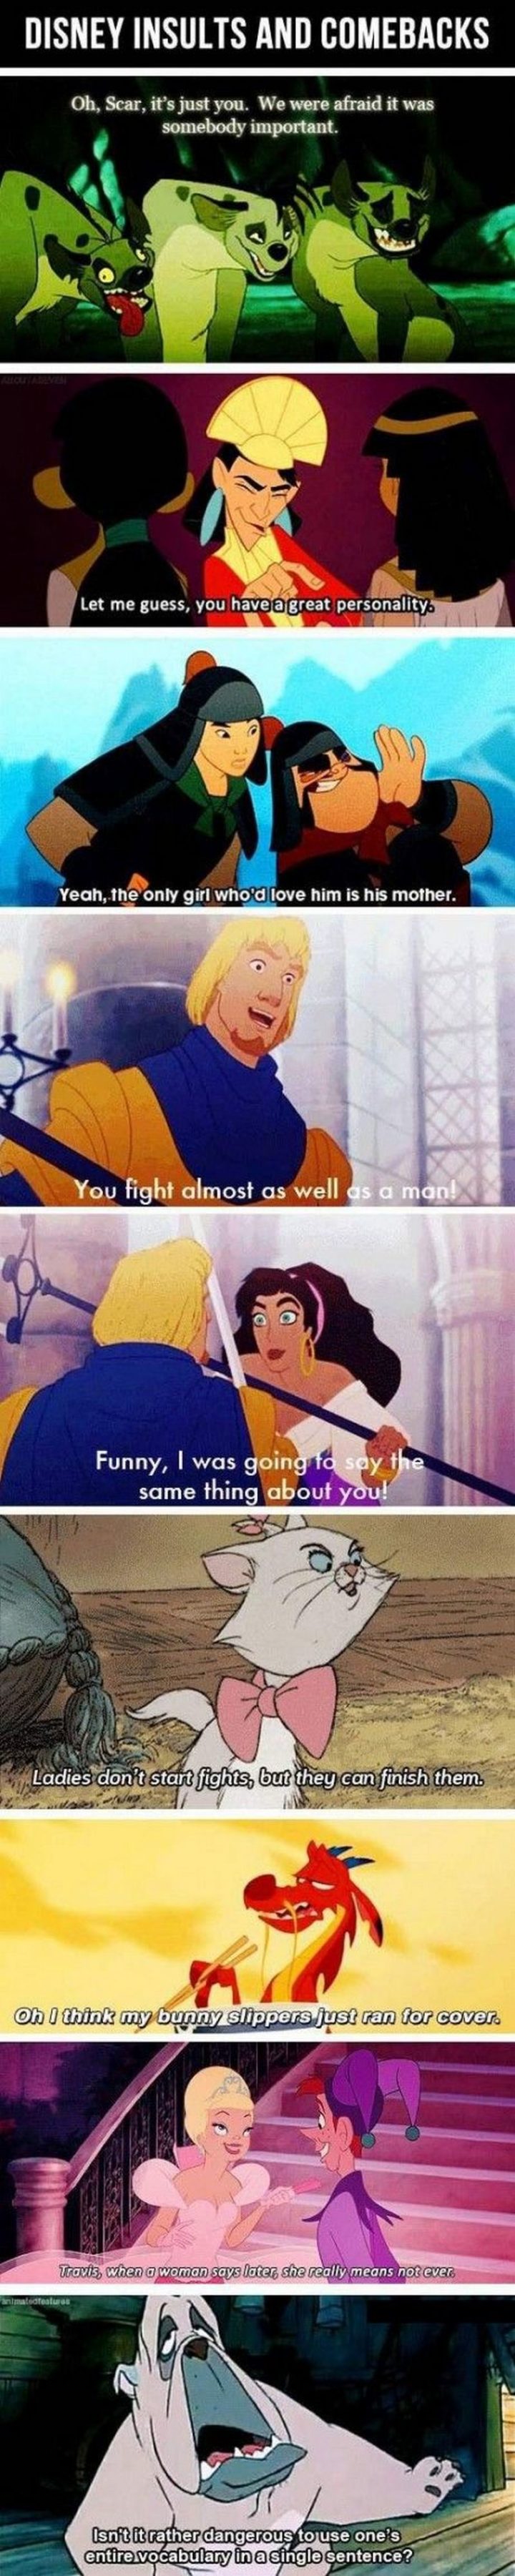 "Disney insults and comebacks. Oh, Scar, it's just you. We were afraid it was somebody important. Let me guess, you have a great personality. Yeah, the only who'd love him is his mother. You fight almost as well as a man! Funny, I was going to say the same thing about you! Ladies don't start fights, but they can finish them. Oh, I think my bunny slippers just ran for cover. Travis, when a woman says later, she really means not ever. Isn't it rather dangerous to use one's entire vocabulary in a single sentence?"